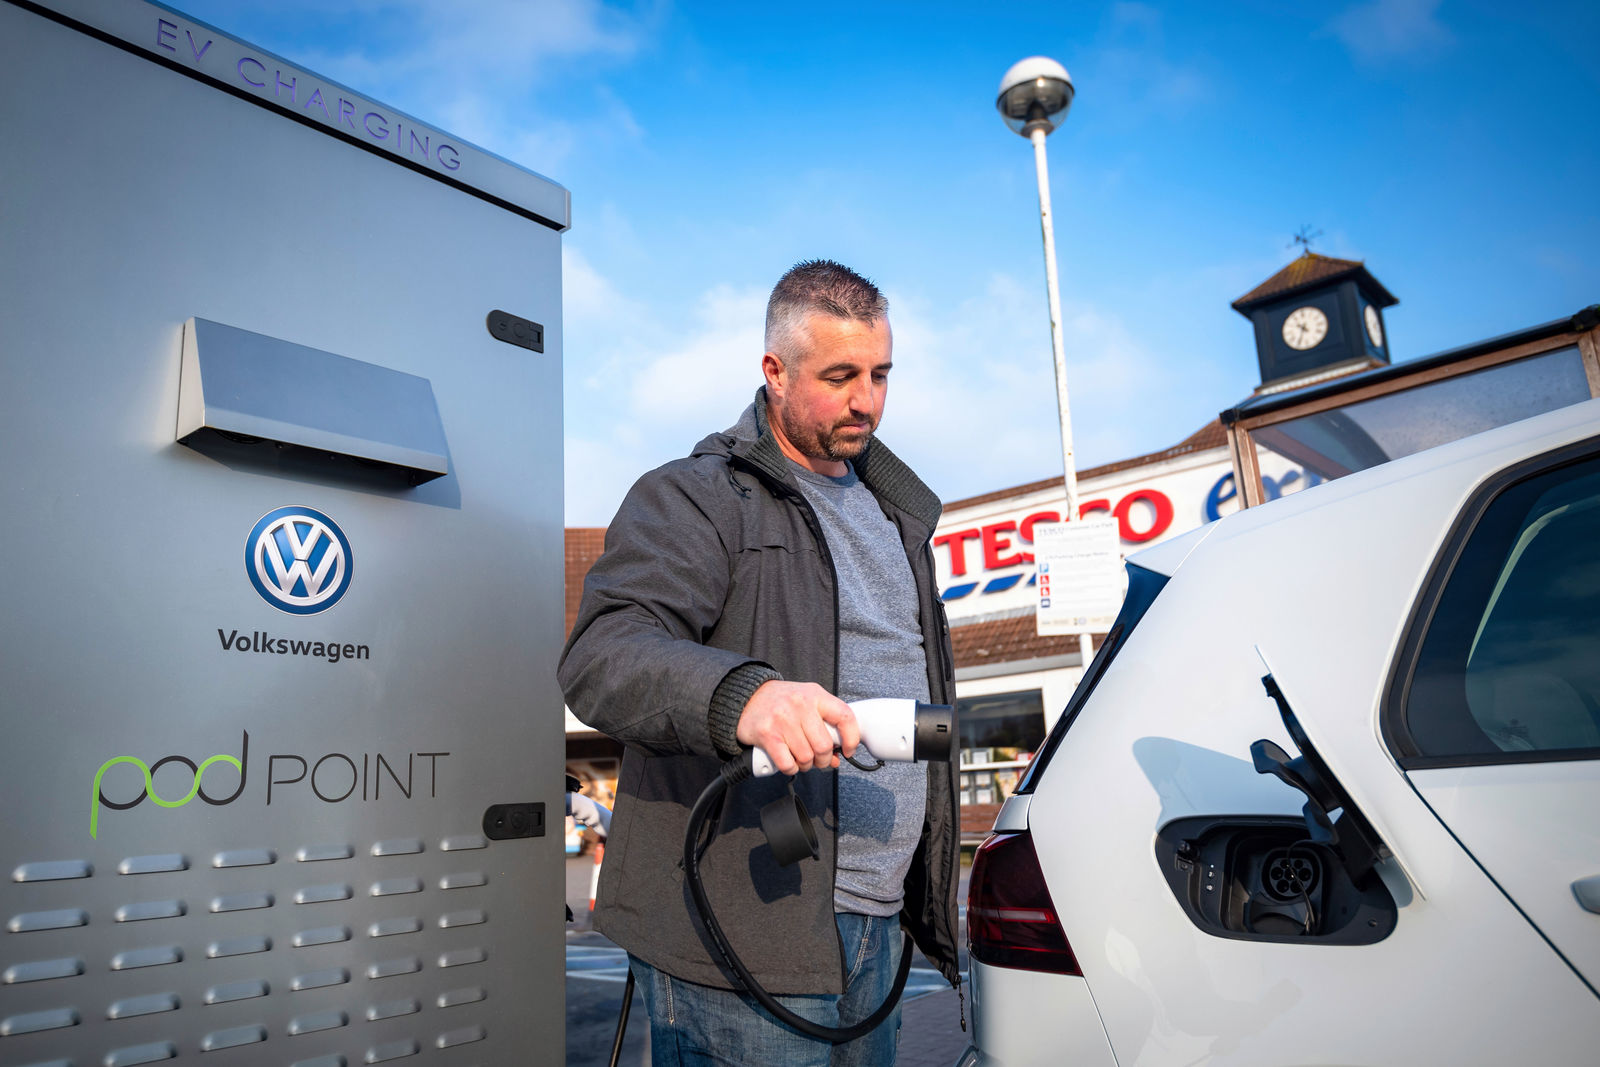 Charge your electric car while you shop:  Volkswagen and Tesco now partners in the UK